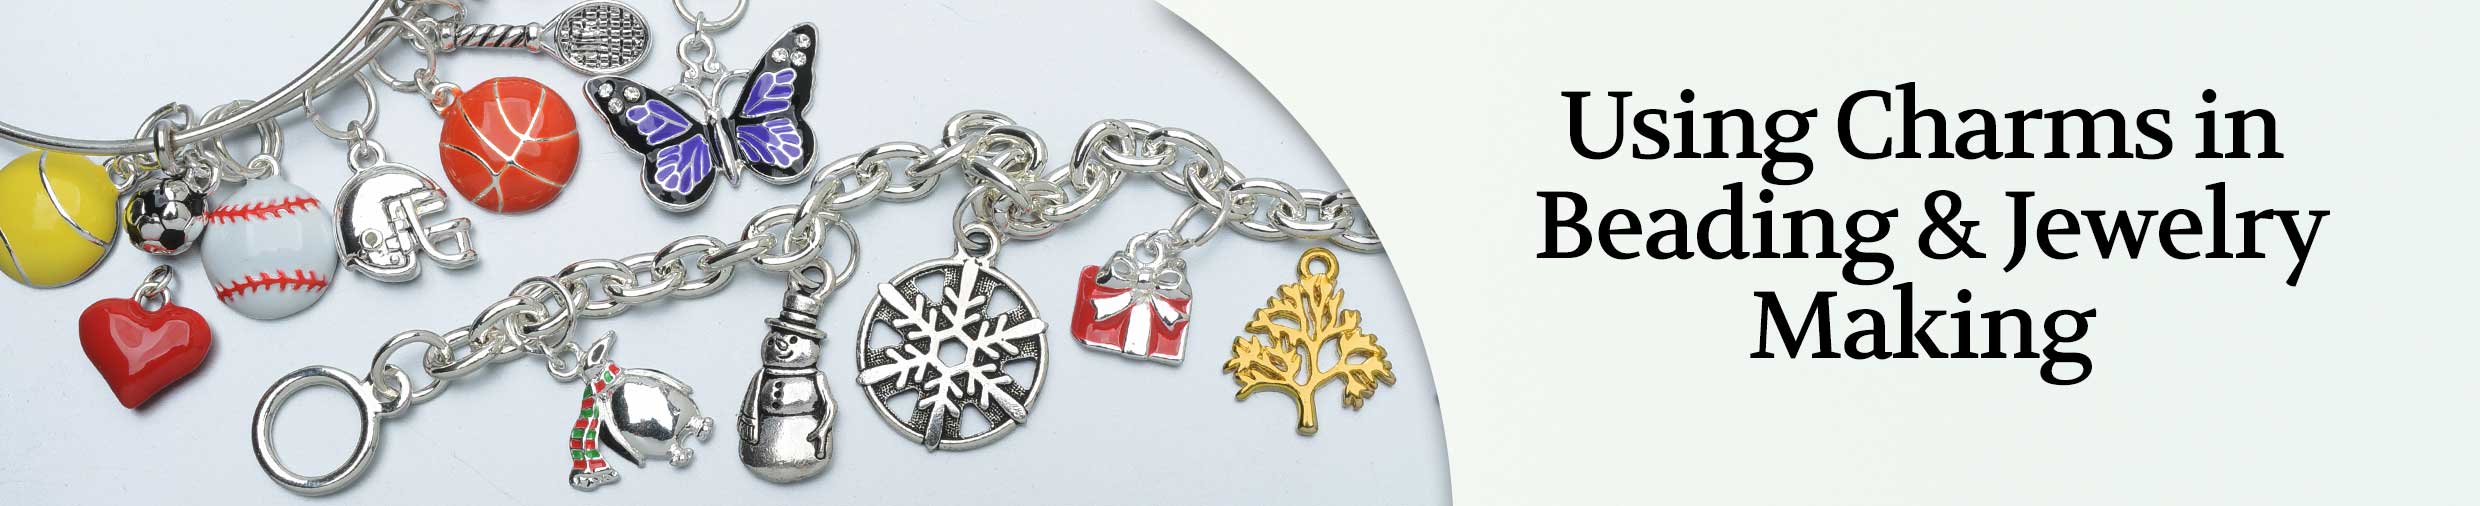 Using Charms in Beading and Jewelry Making